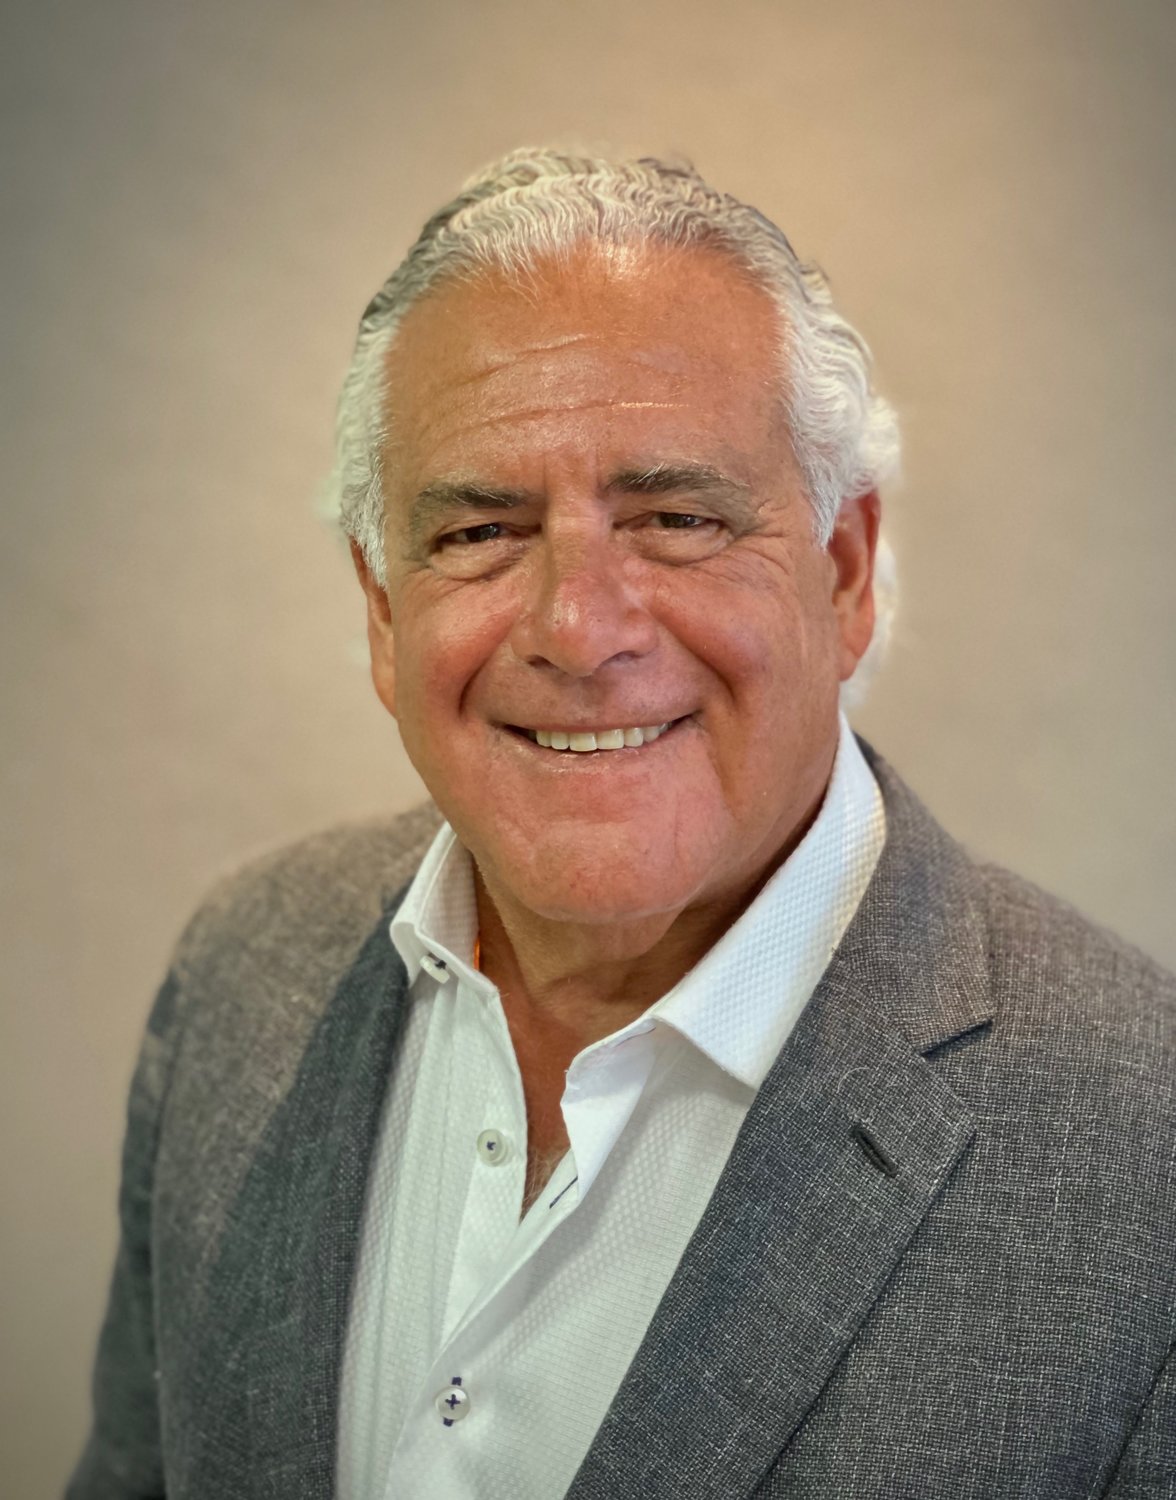 With much leadership experience, former Sea Cliff mayor Ed Lieberman has signed on to lead the Gold Coast Business Association as its new president.